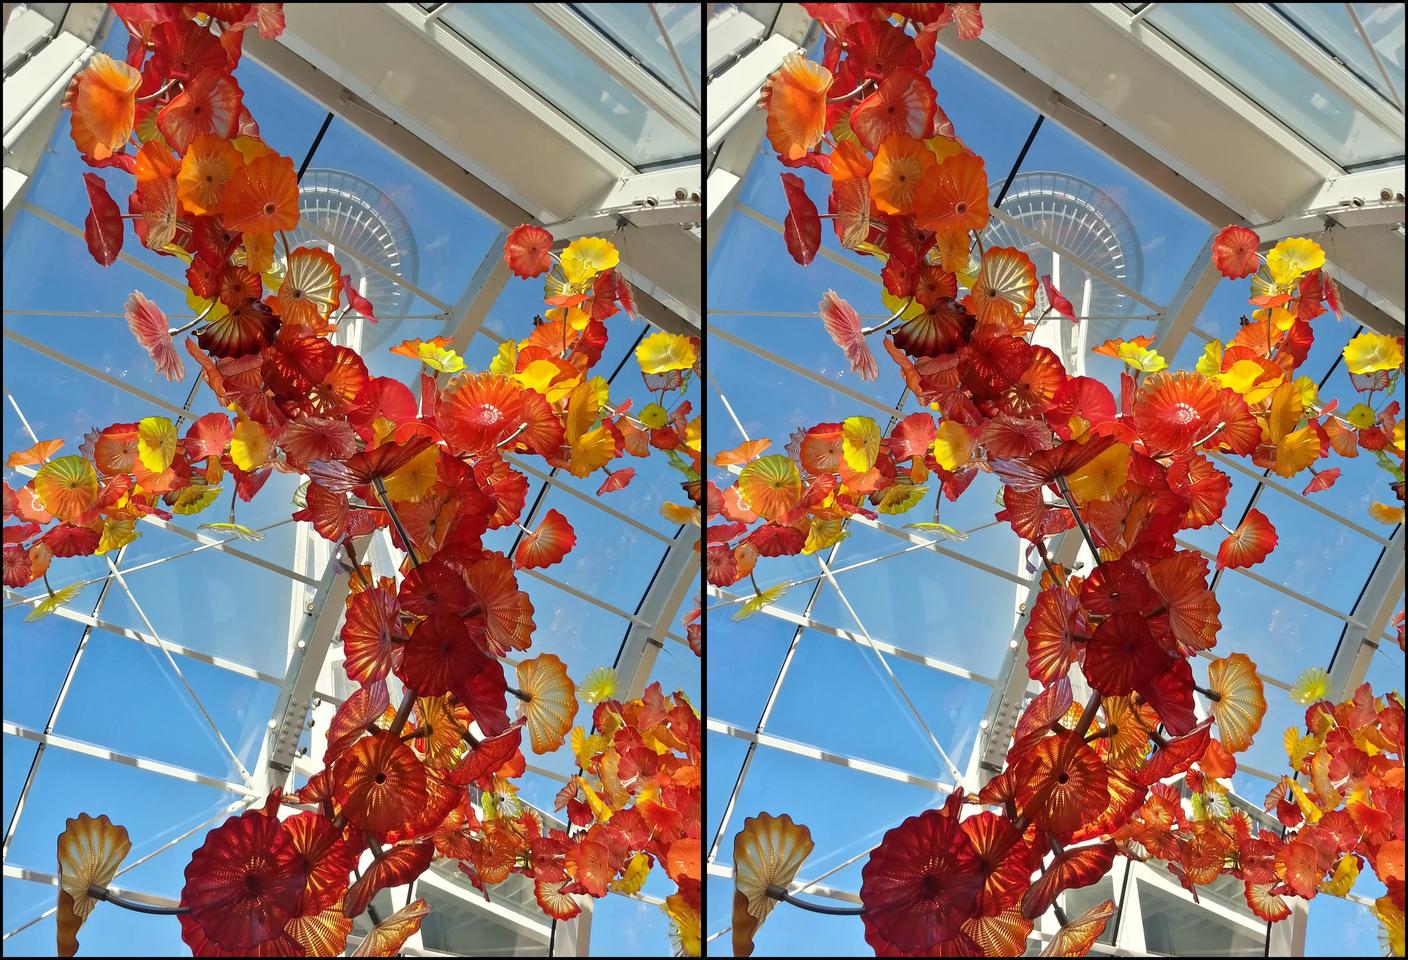 Space Needle from Chihuly Garden and Glass